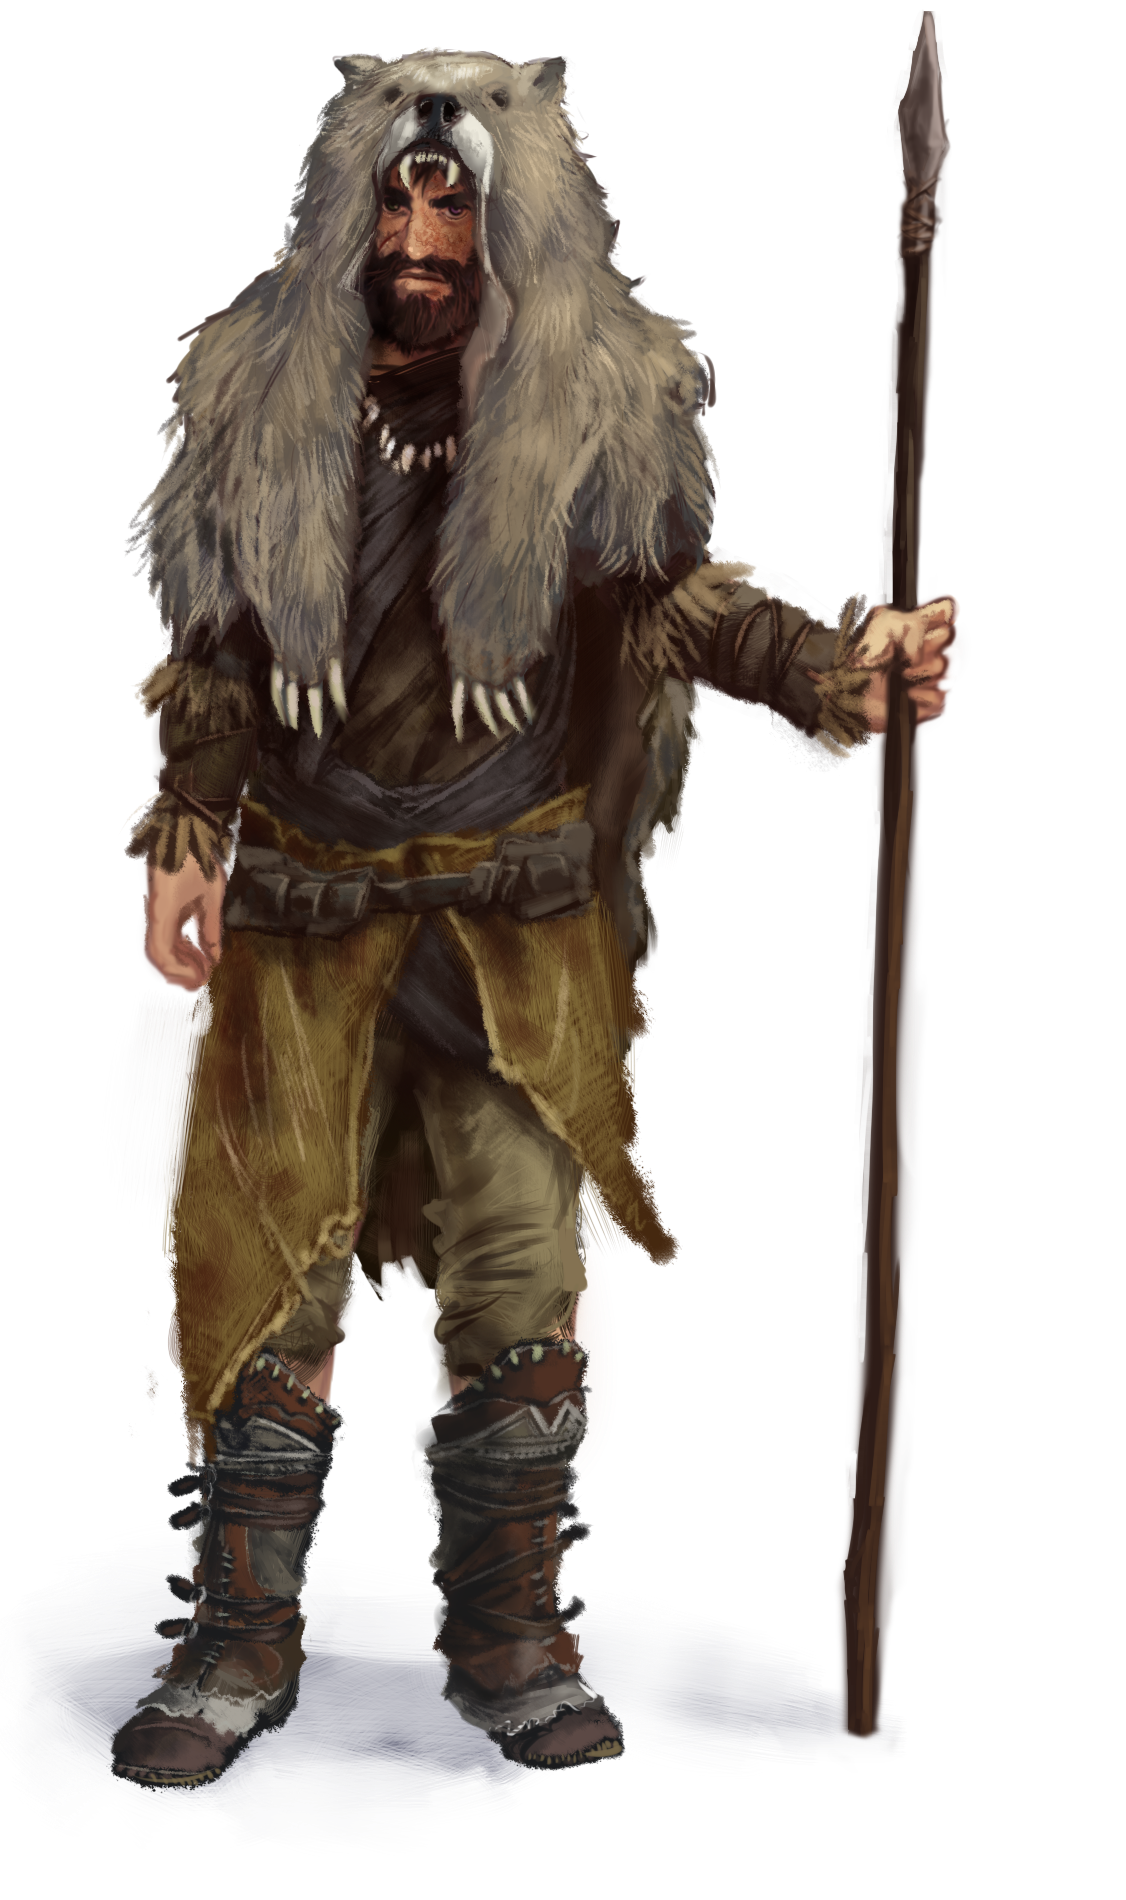 Character is [SHAW - N] (S-H-A-U-N) from D&D, he is a druid: A man stands here, most noticeable about him is the headdress of a wolf that he wears upon his head. He has a brown beard and mustache over a rather plain face. His garments consist of assorted leathers in various earthen tones. He has leather bracers on and a belt which is wrapped about a sort of war kilt. Scrappy leather boots climb up his shins to end just a bit below the knee. In one hand he carries a rough, tall wooden spear.